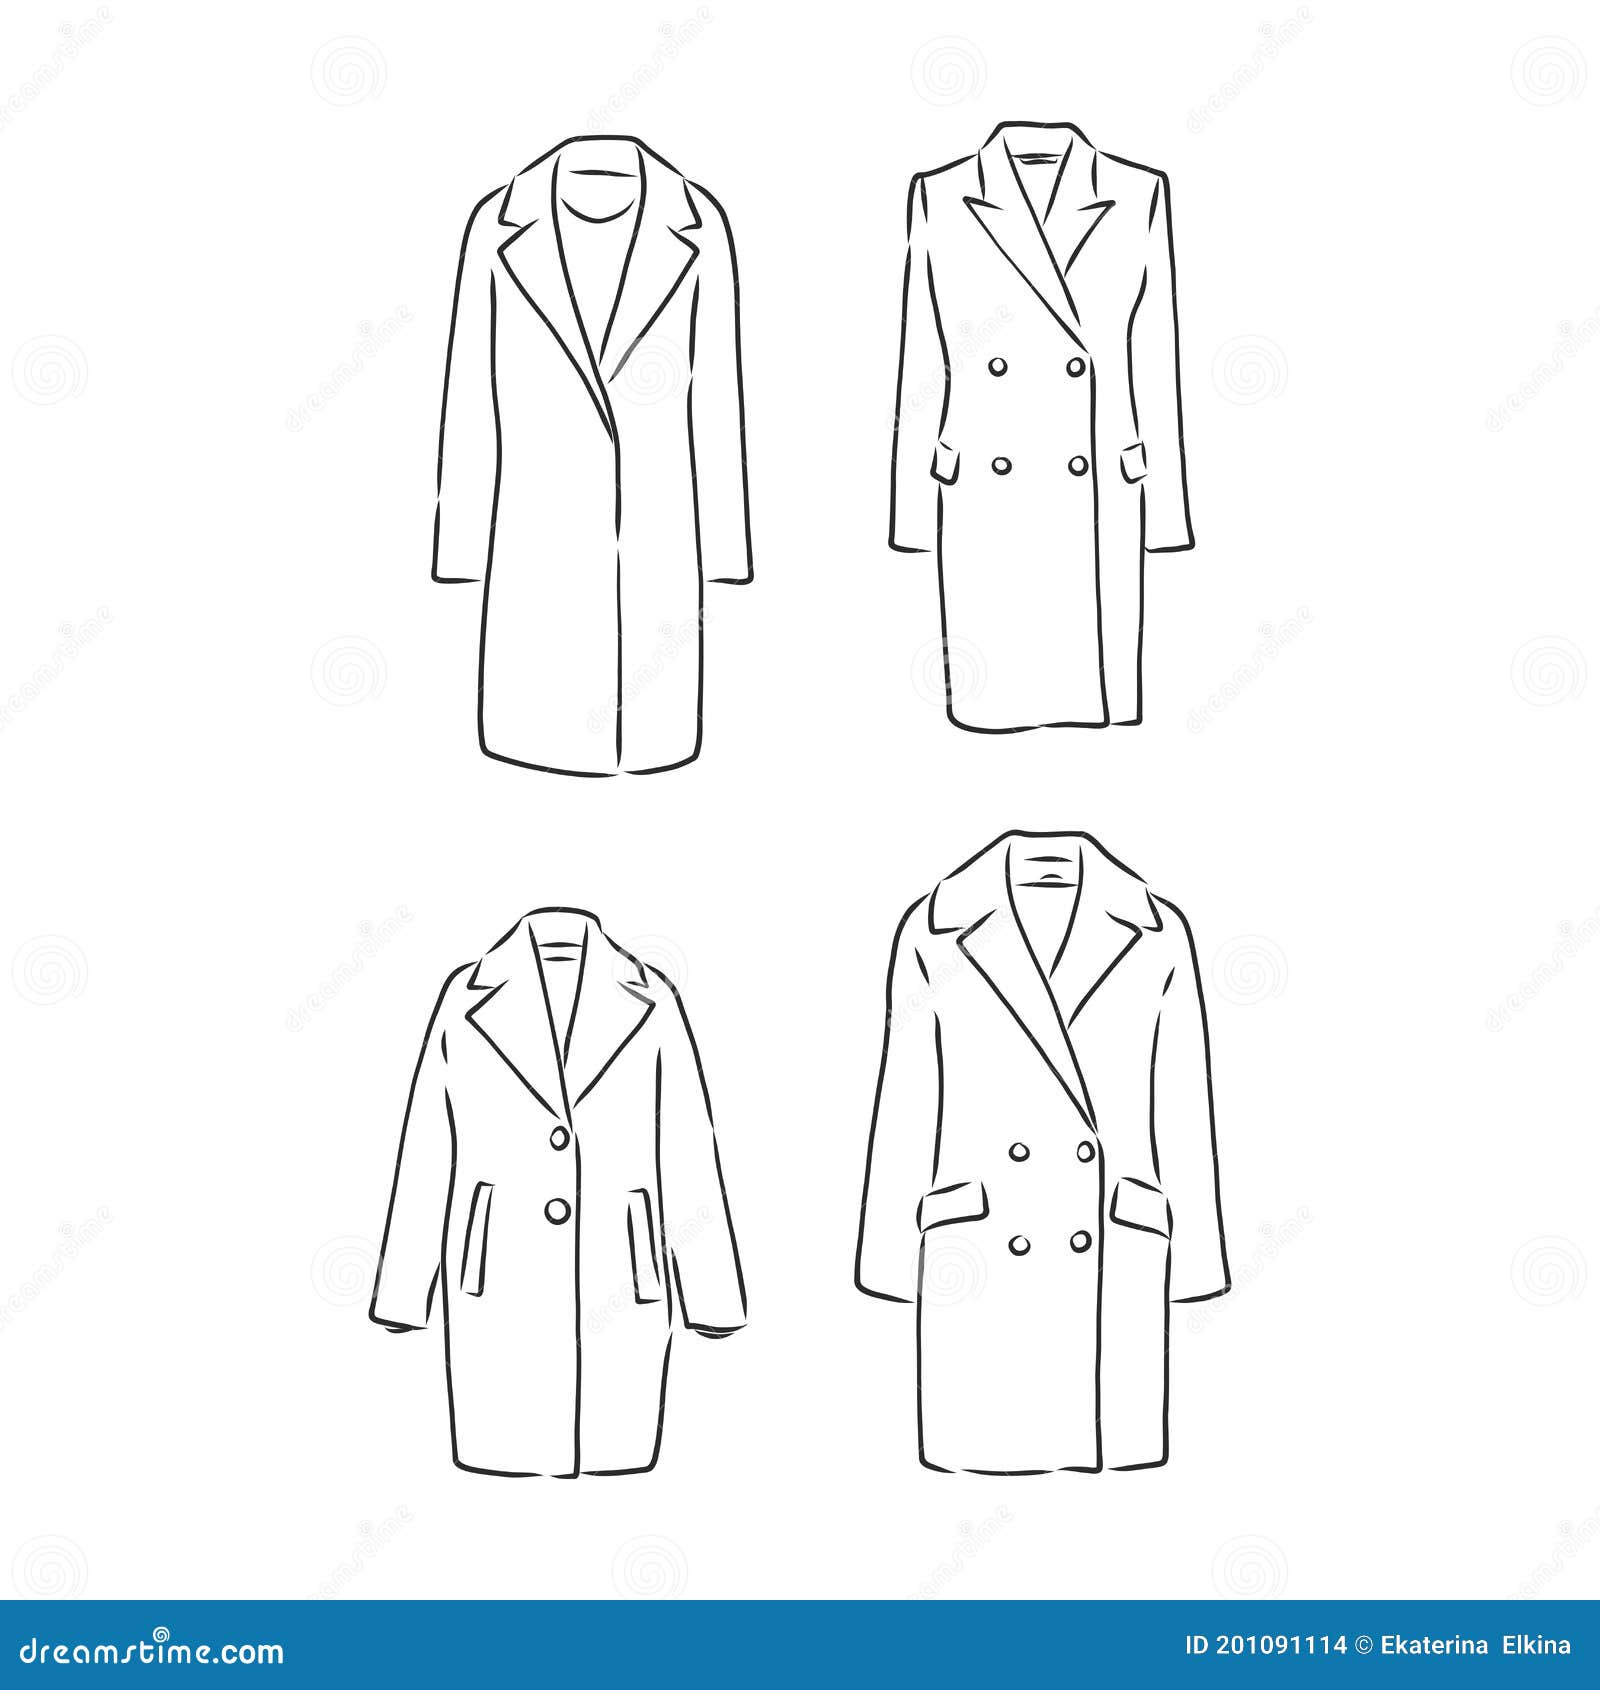 The Lf Lab Coat - Sketch Transparent PNG - 915x1000 - Free Download on  NicePNG